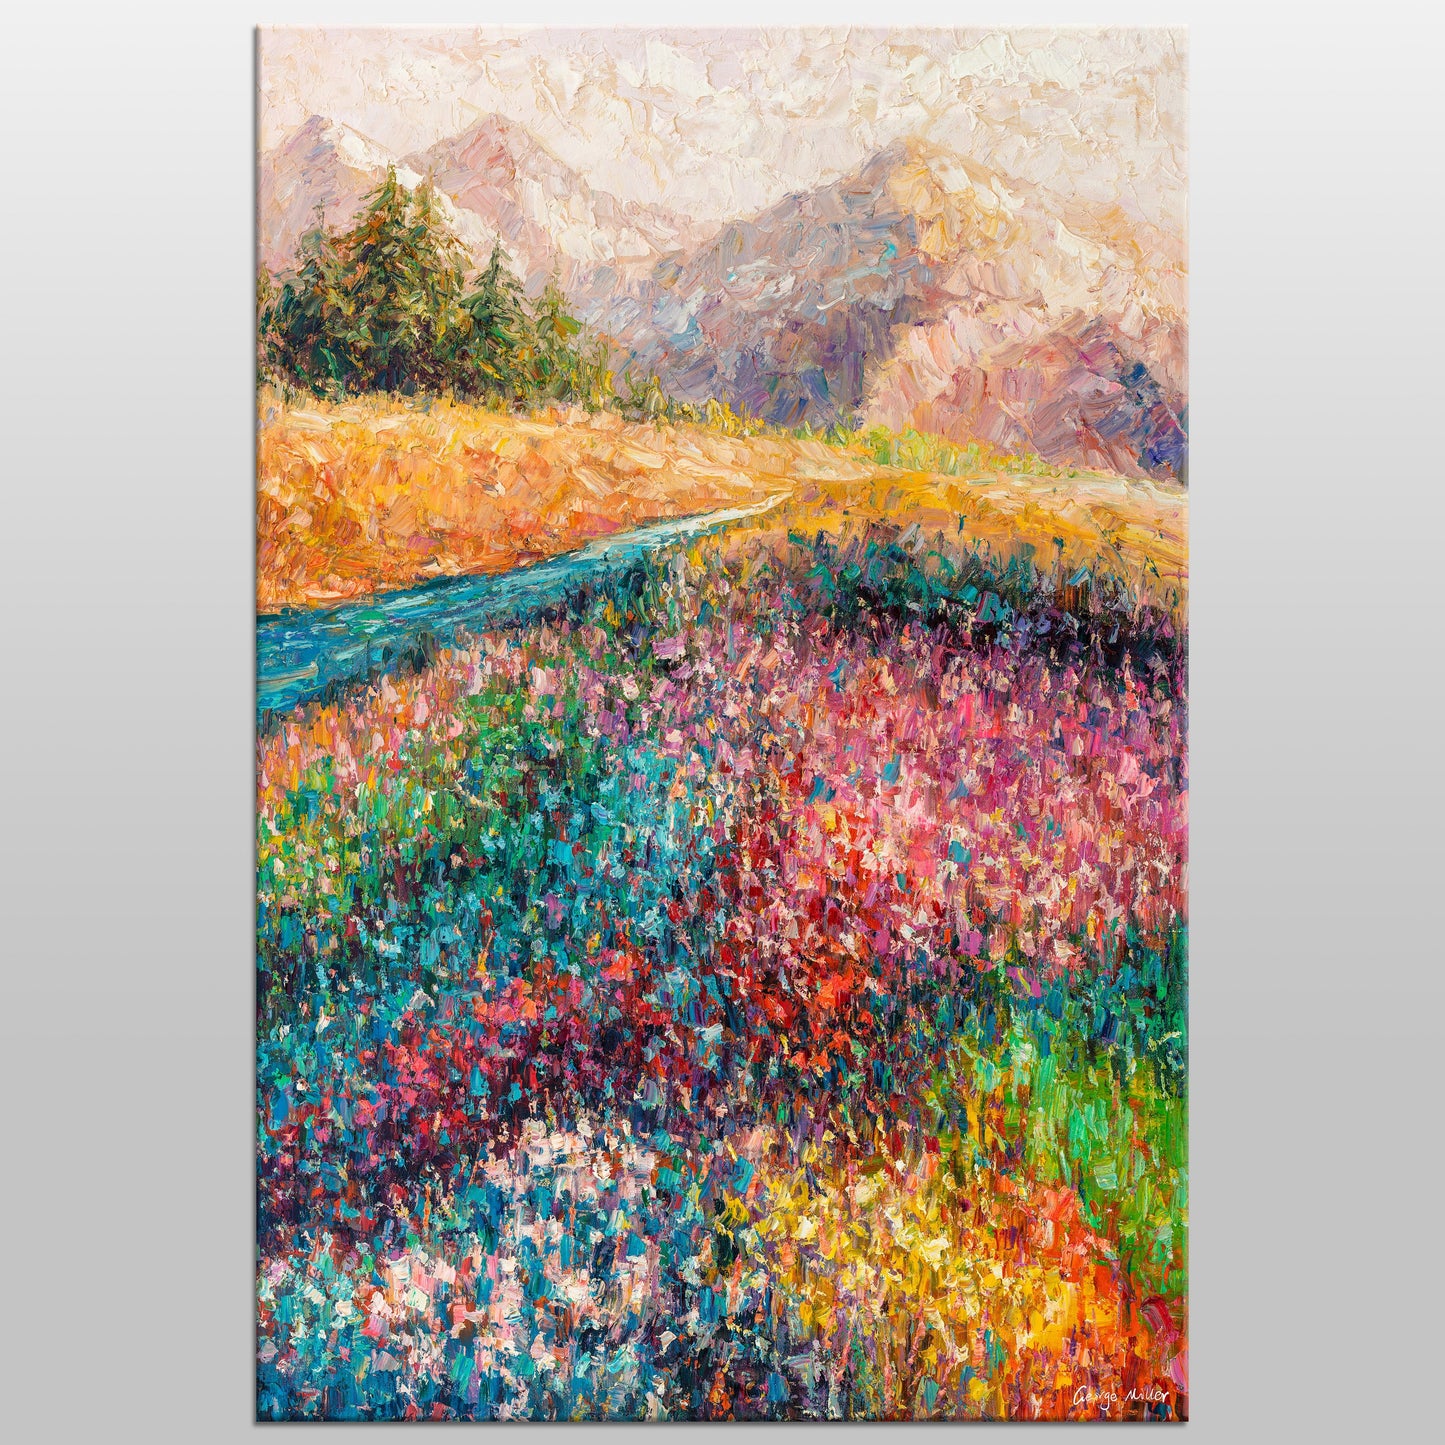 Add Life to Your Walls with this George Miller Original Oil Painting of Mountains with Wildflowers - Oversized 32x48-Inch Wall Art